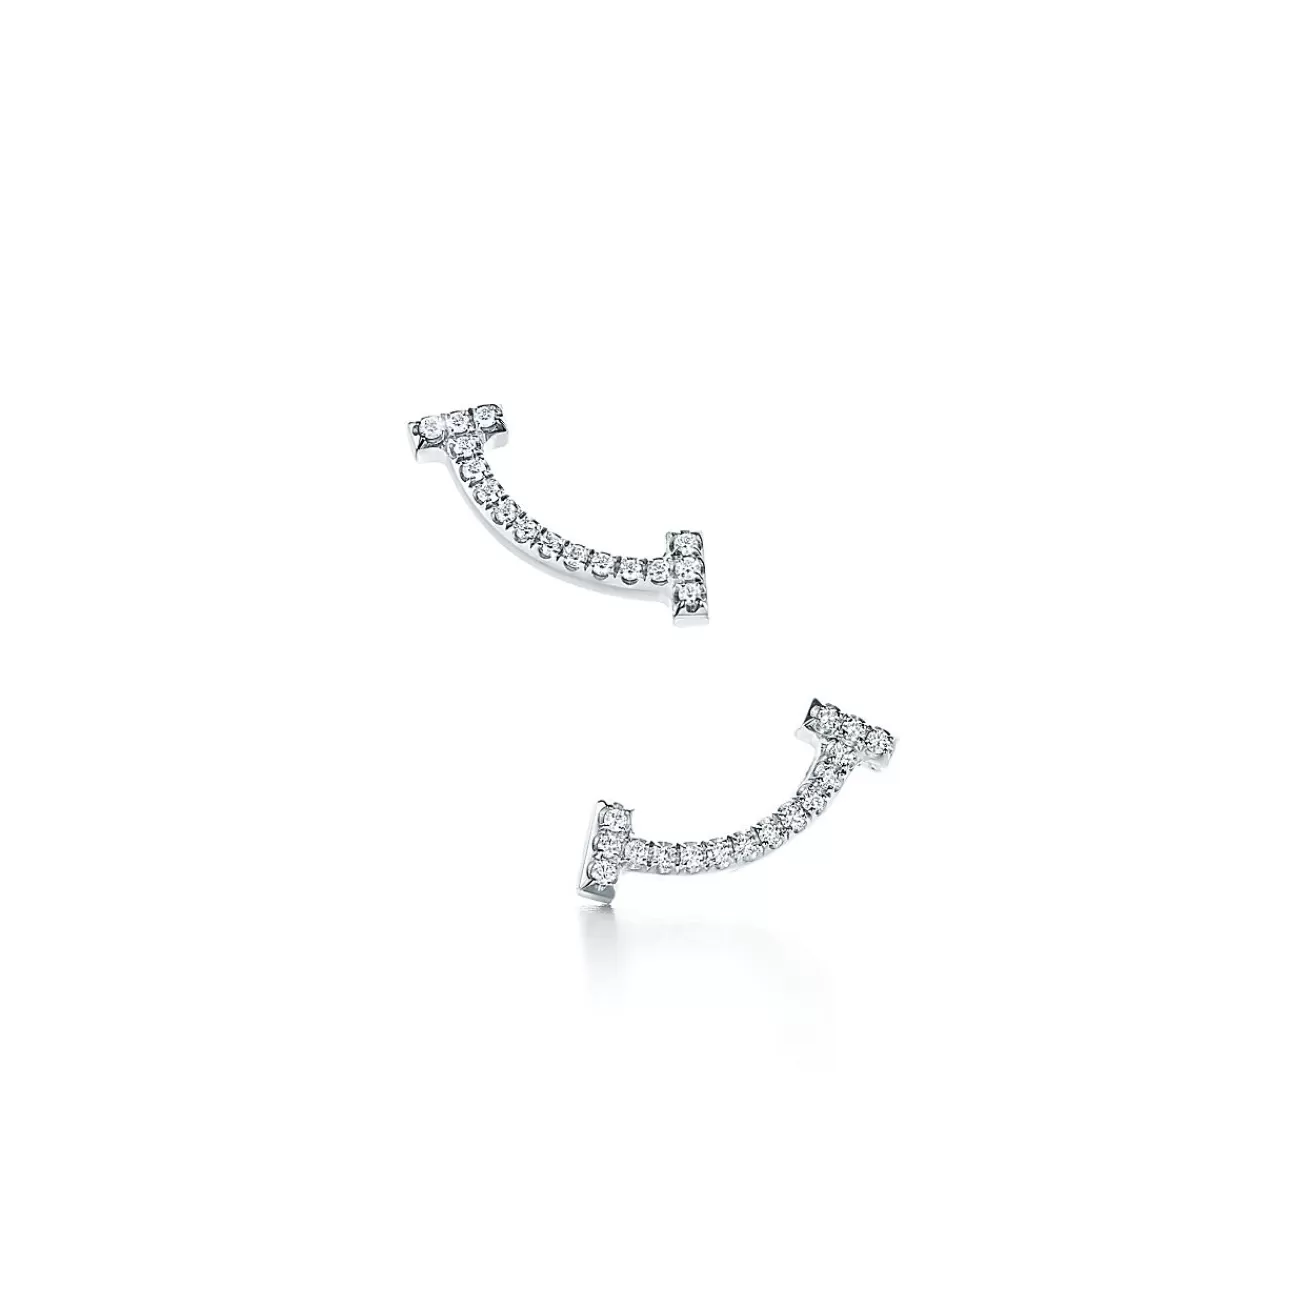 Tiffany & Co. Tiffany T smile earrings in 18k white gold with diamonds. | ^ Earrings | Gifts for Her